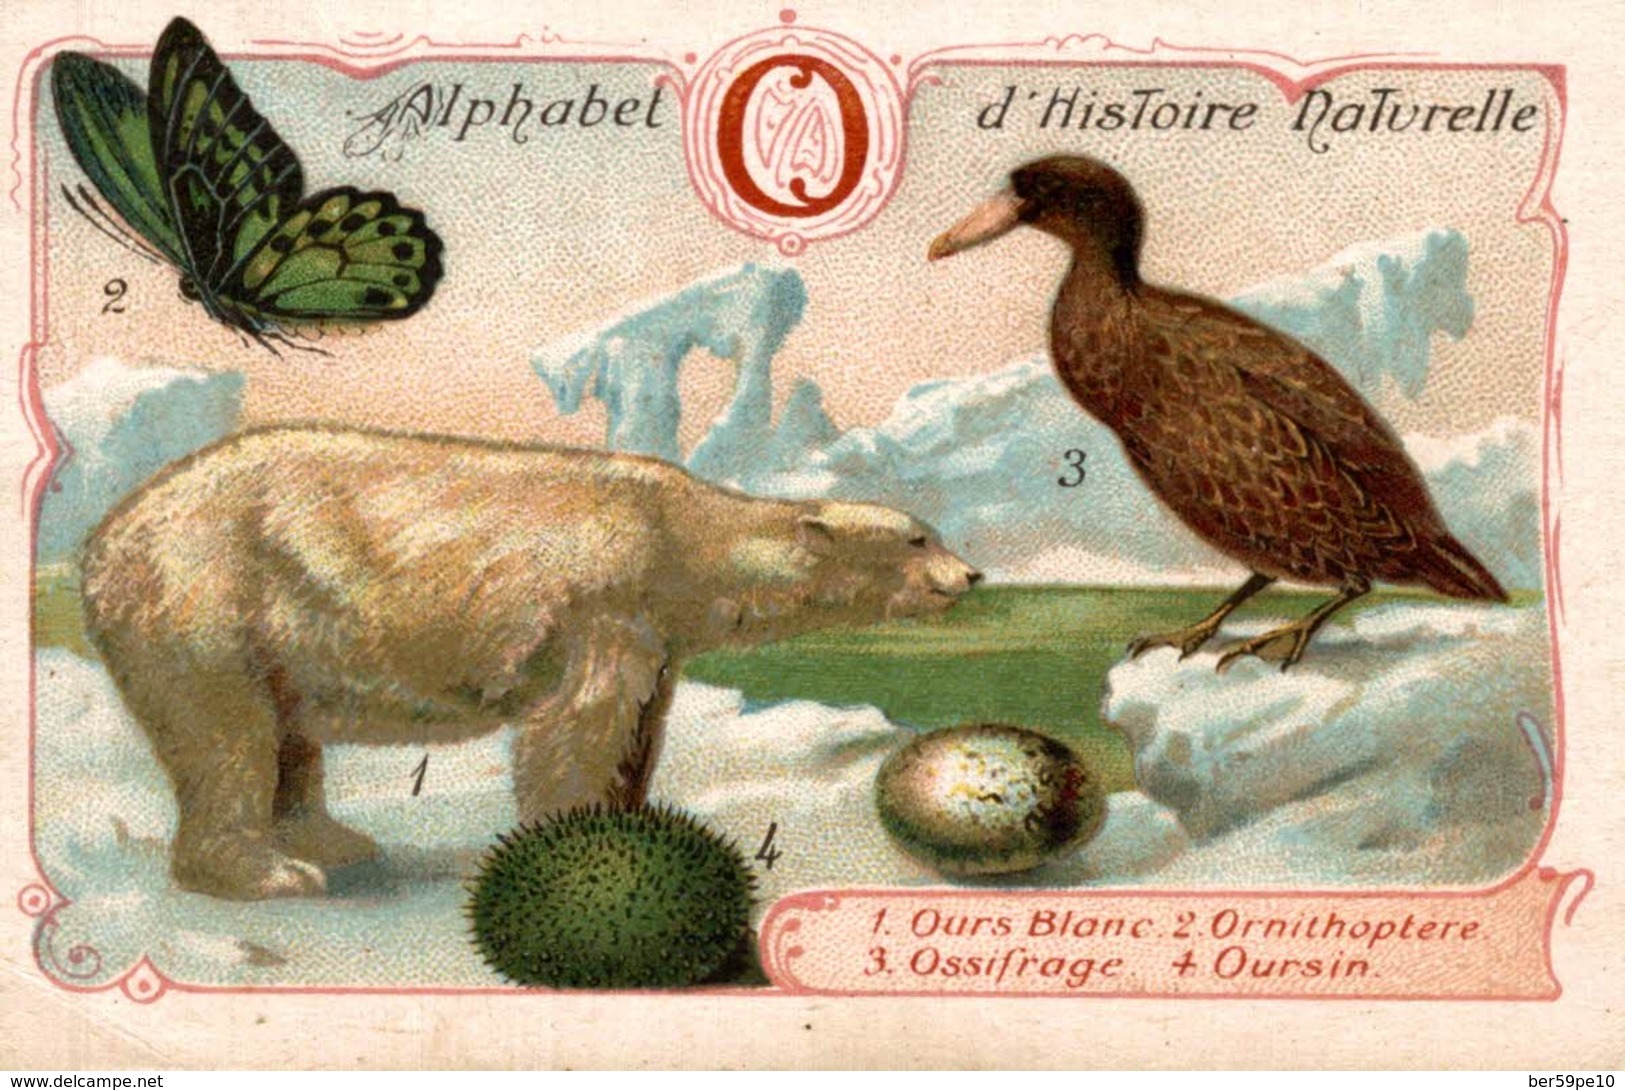 CHROMO  ALPHABET D'HISTOIRE NATURELLE    1 OURS BLANC  2 ORNITHOPTERE  3 OSSIFRAGE  4 OURSIN - Albums & Catalogues